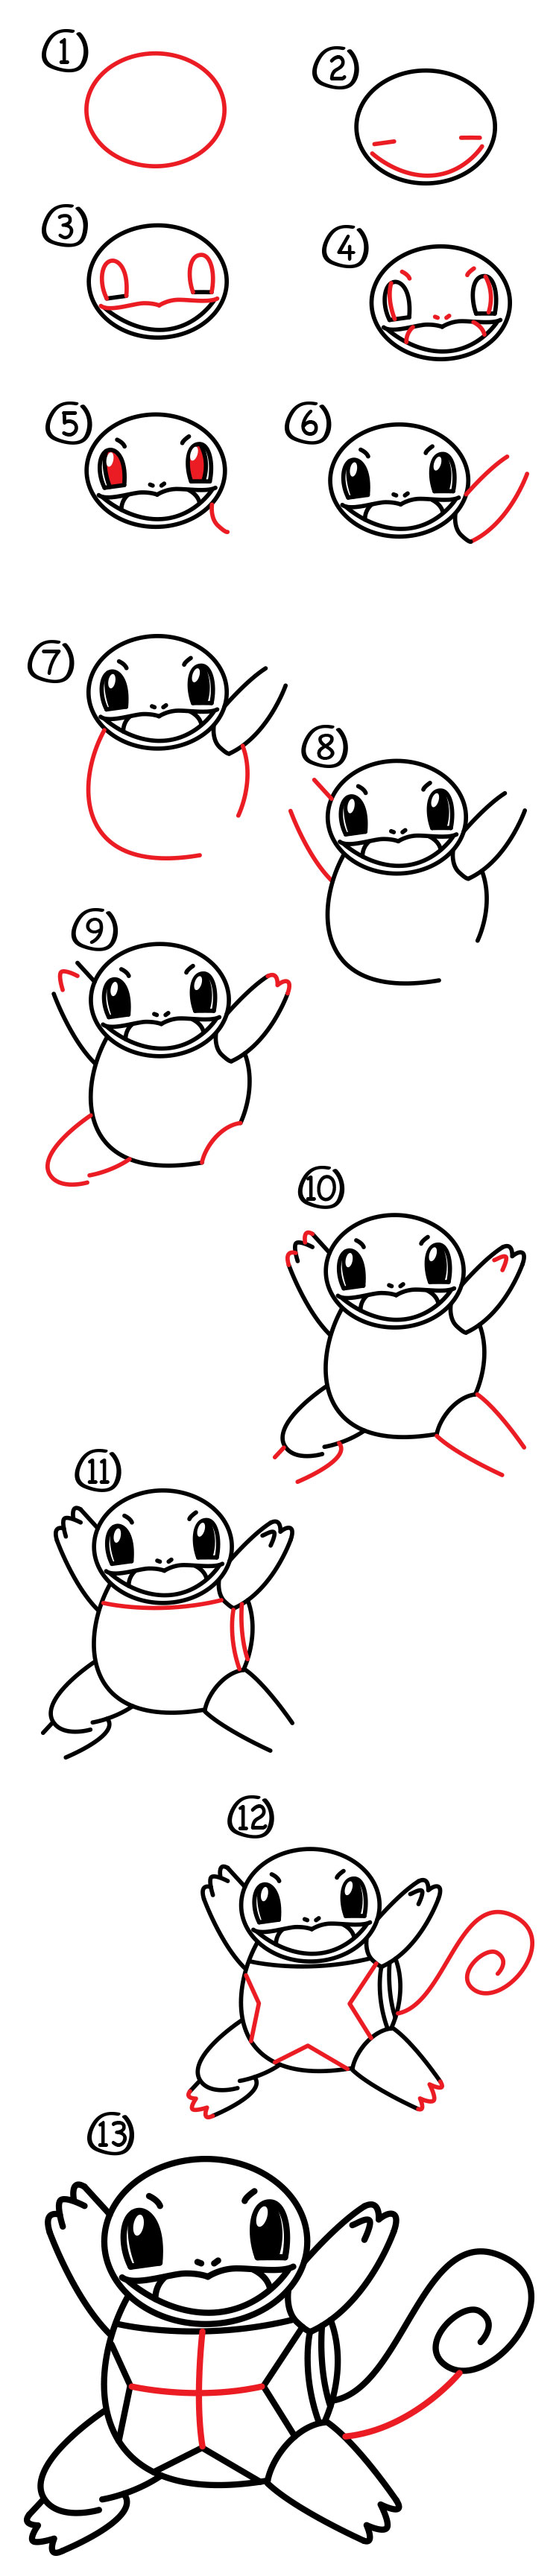 How To Draw Squirtle Pokemon - Art For Kids Hub